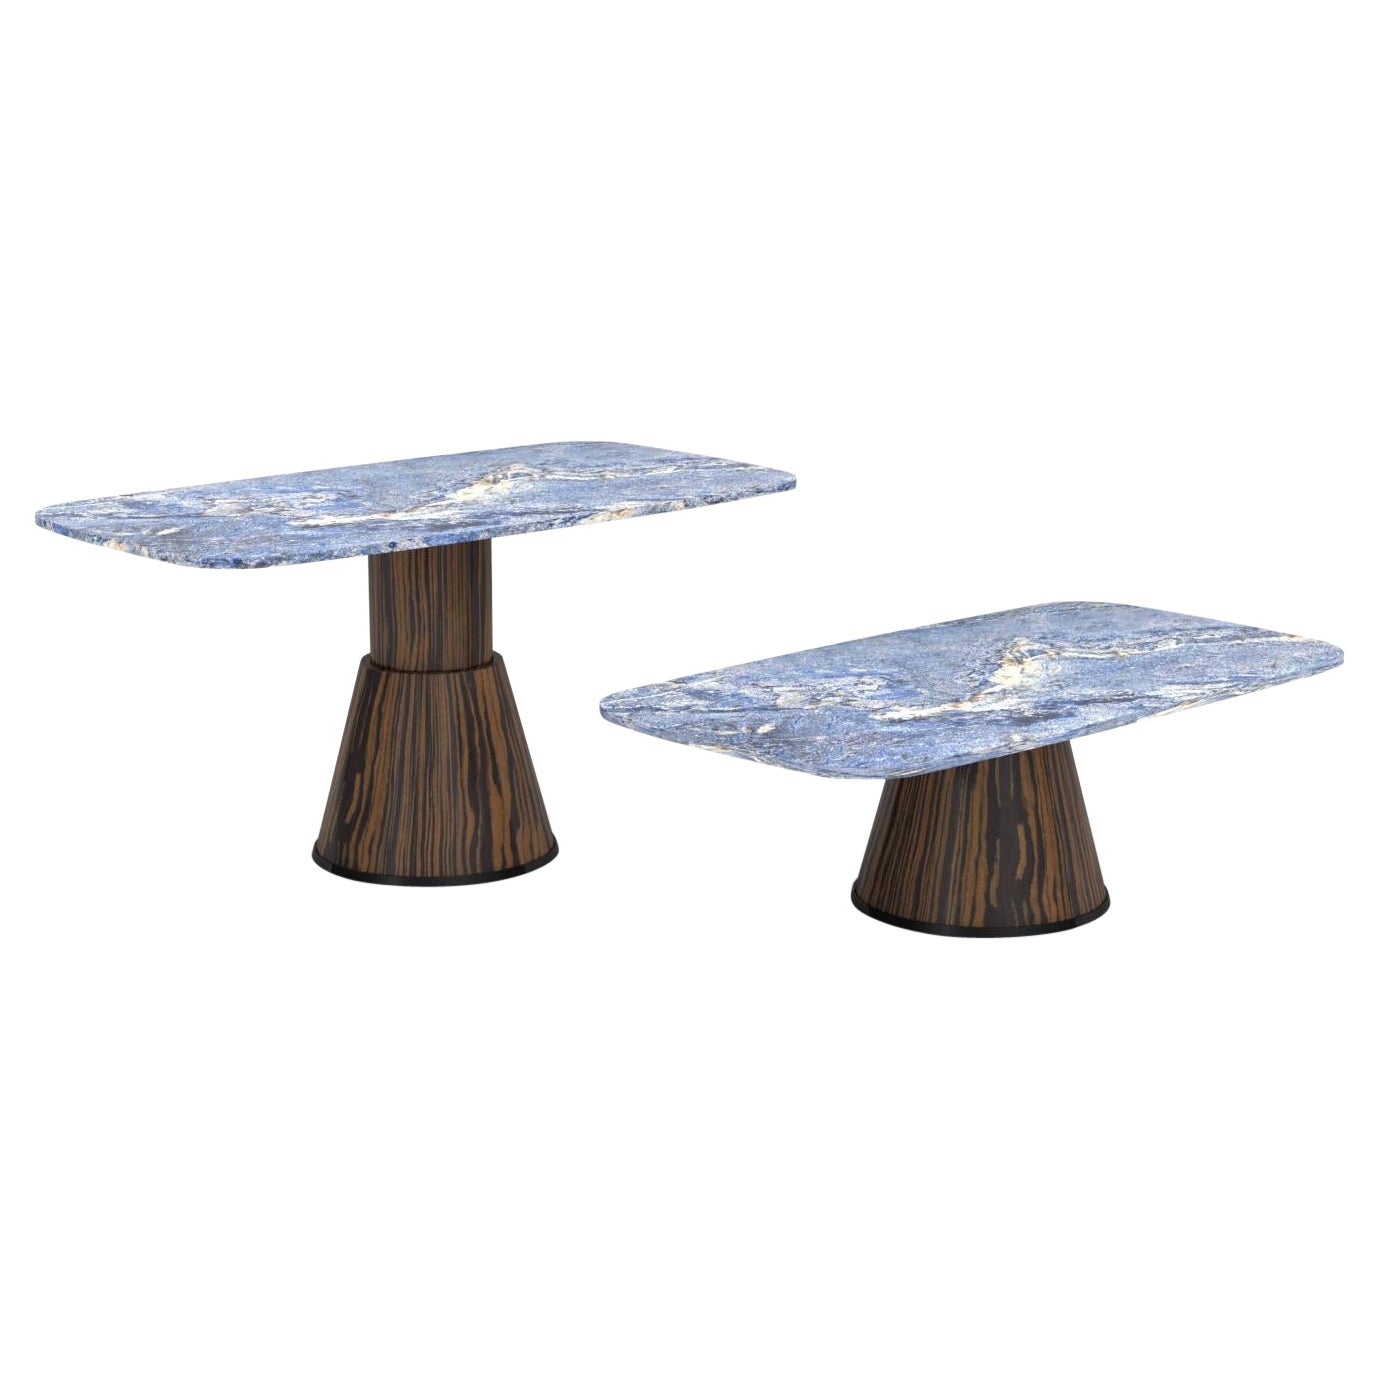 Contemporary Smart Table - Modern Living Room Electronic Height-Adjustable Granite Table For Sale